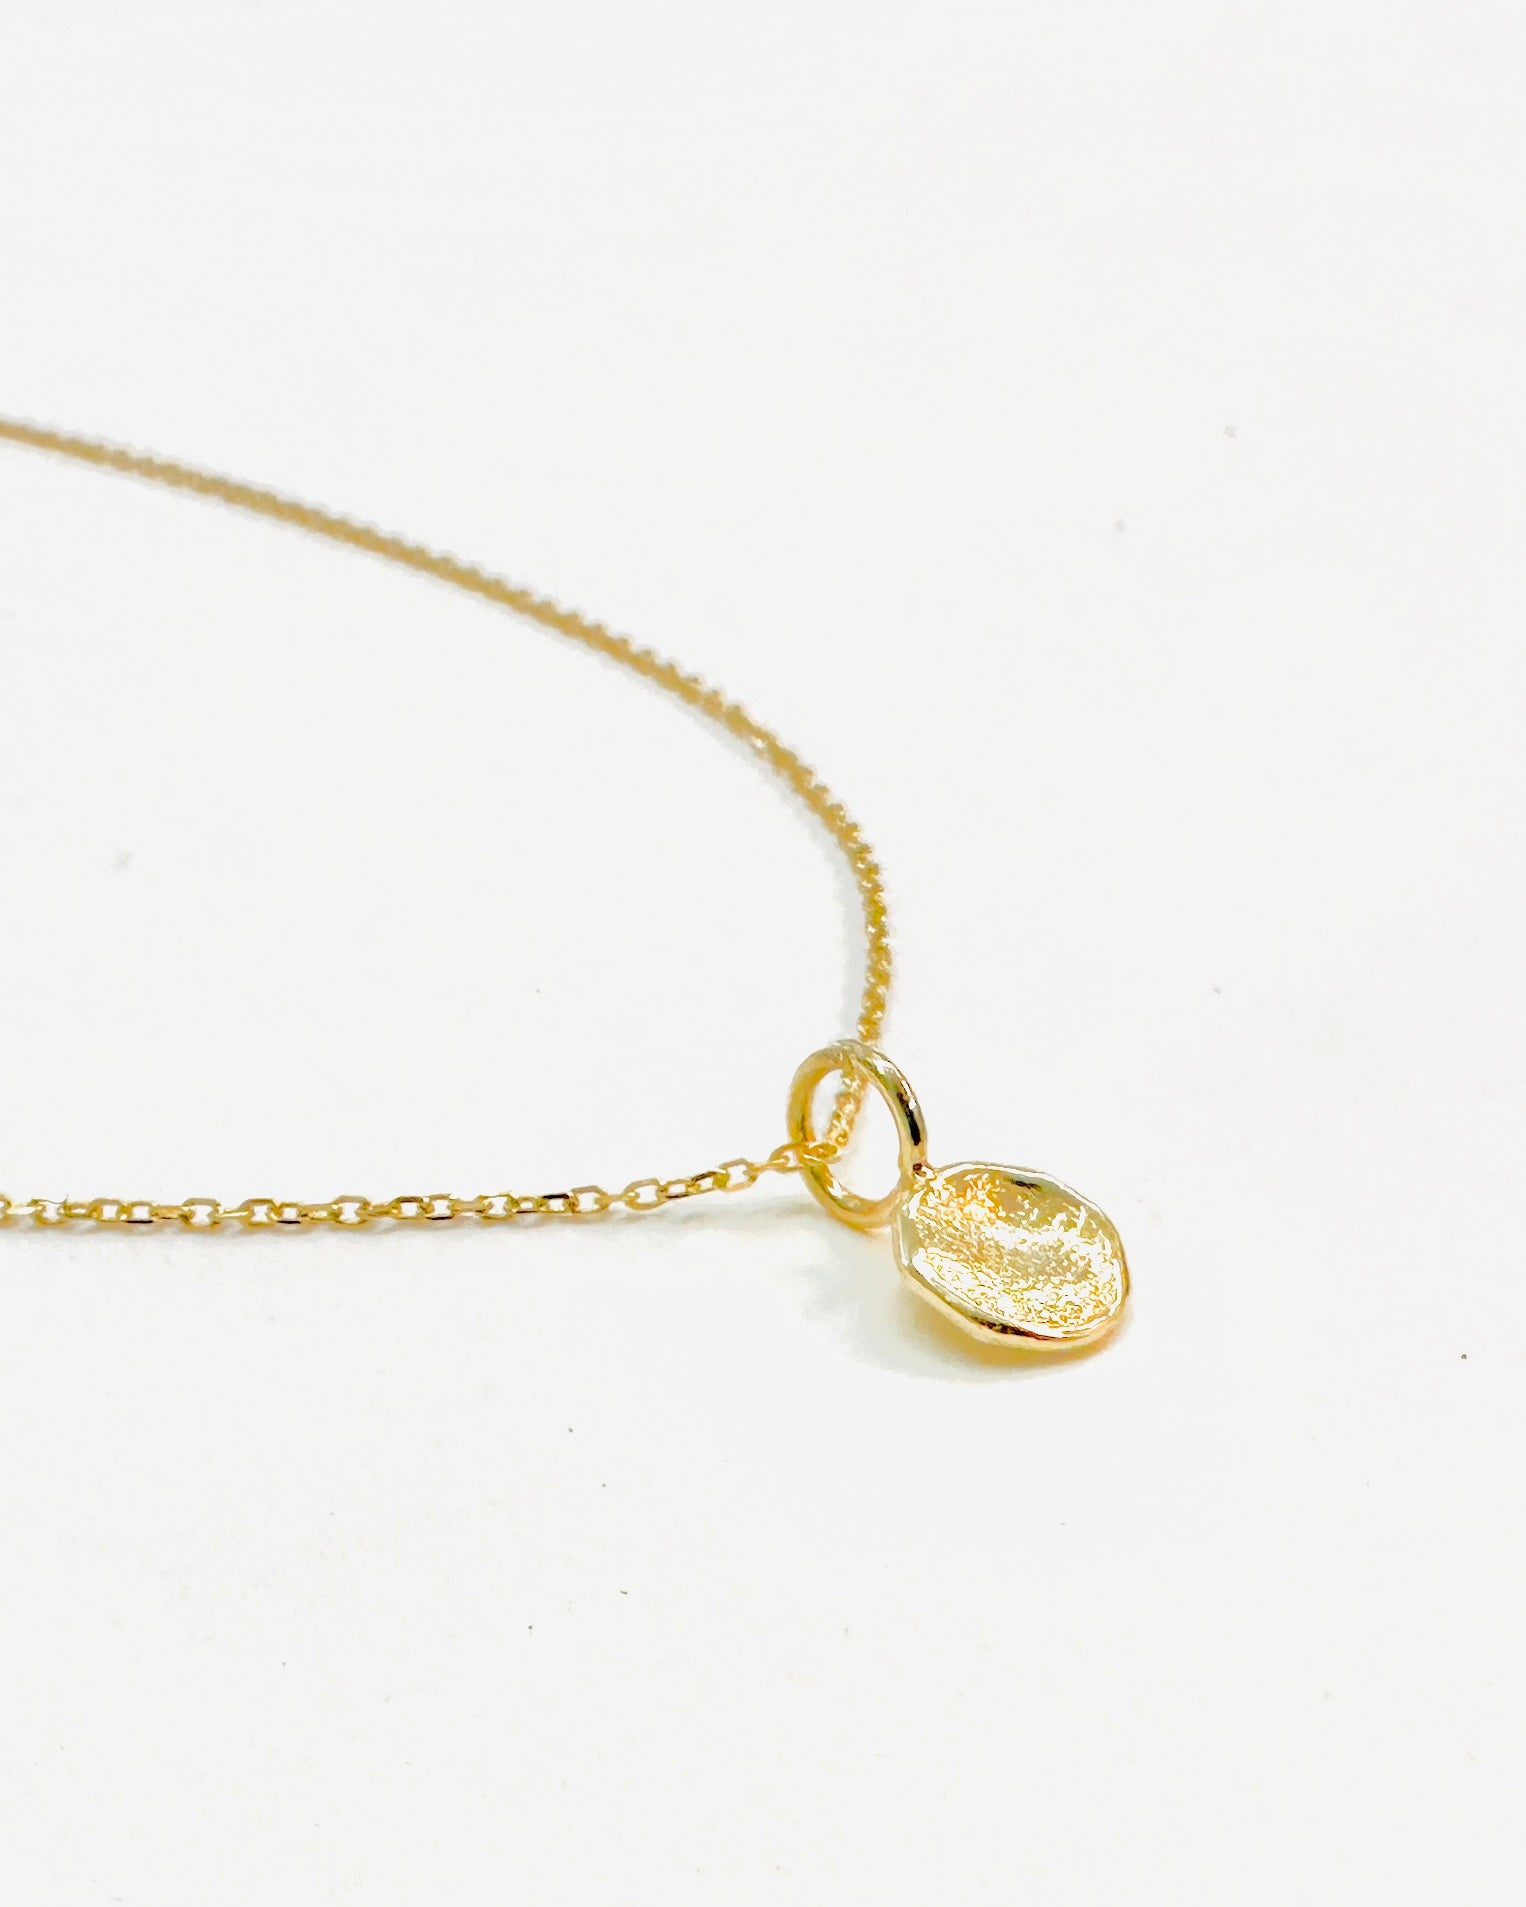 solid gold mini disc pendant with subtle texture on a delicate 14k gold chain